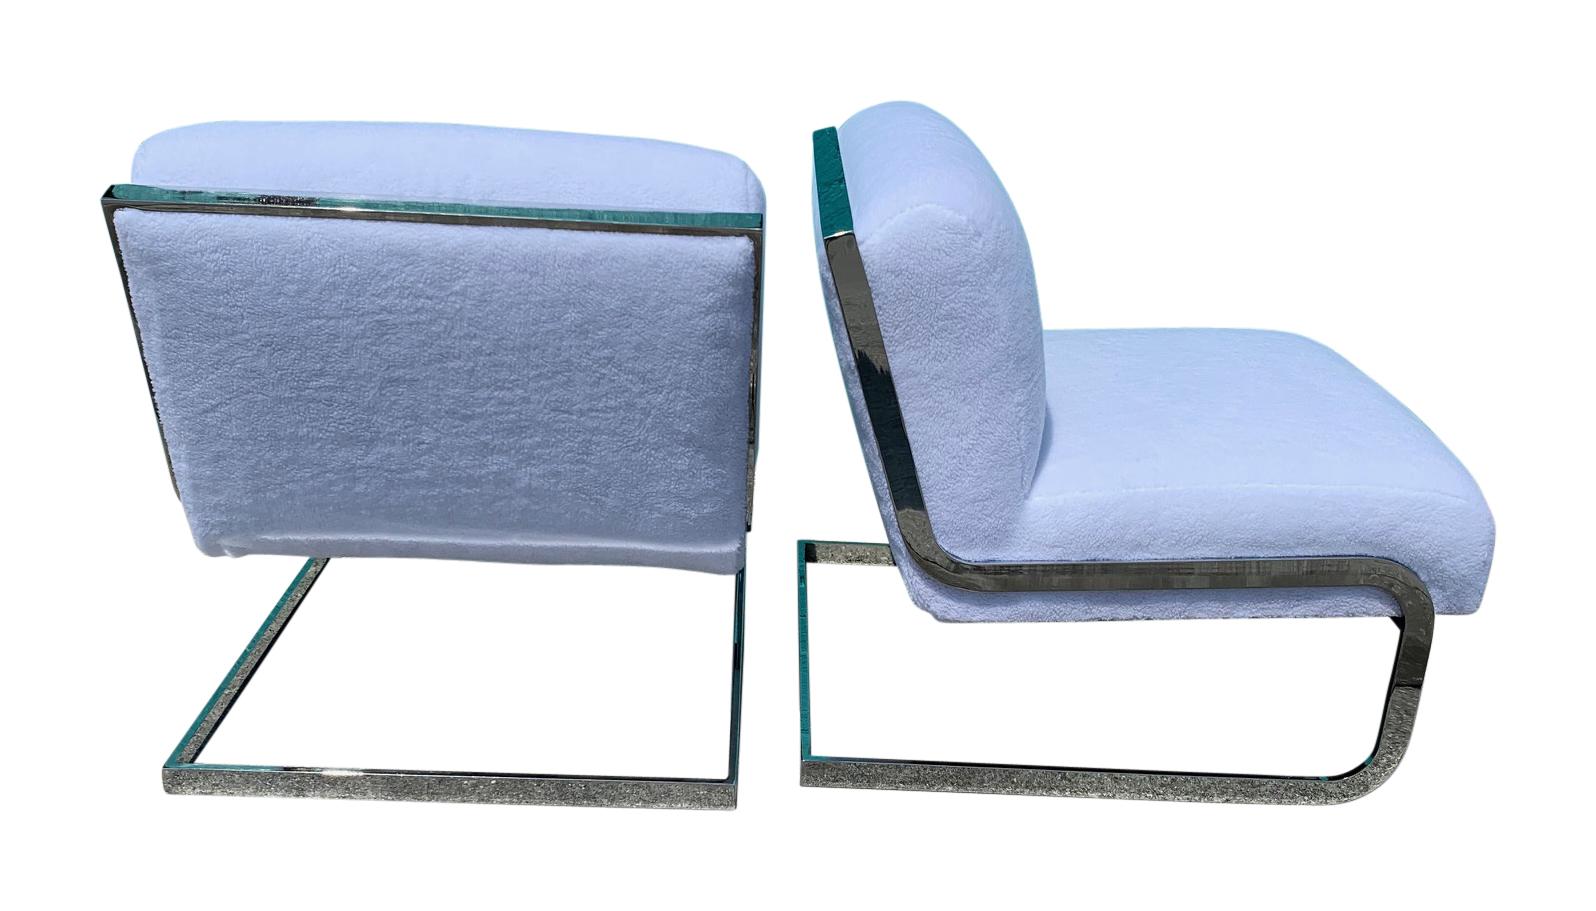 North American Pair of Chrome Cantilever Lounge Chairs Attributed to Milo Baughman